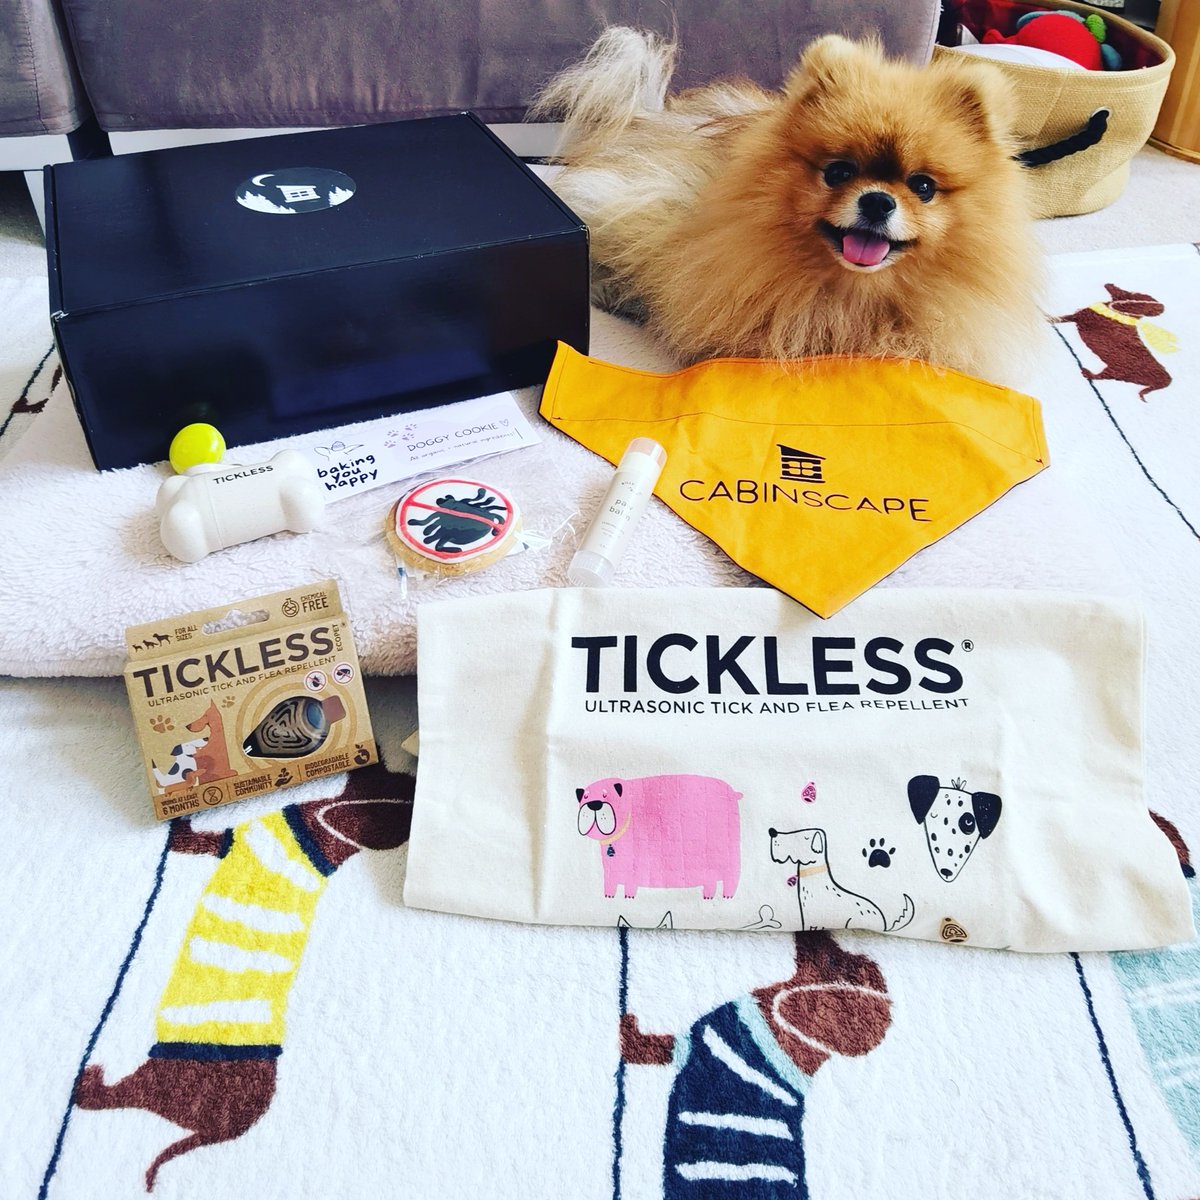 #PortiathePom is all happy after unboxing the #ticklesscanada x @cabinscape Paw Care Package!

[SPONSORED]

#ticklesscanada #tickless #cabinscape #portiathepom #portia 

#carepackage #unbox #unboxing #gifts #petgifts #doggifts #gifts #happydog #dogs #dog #pomeranian #pompom